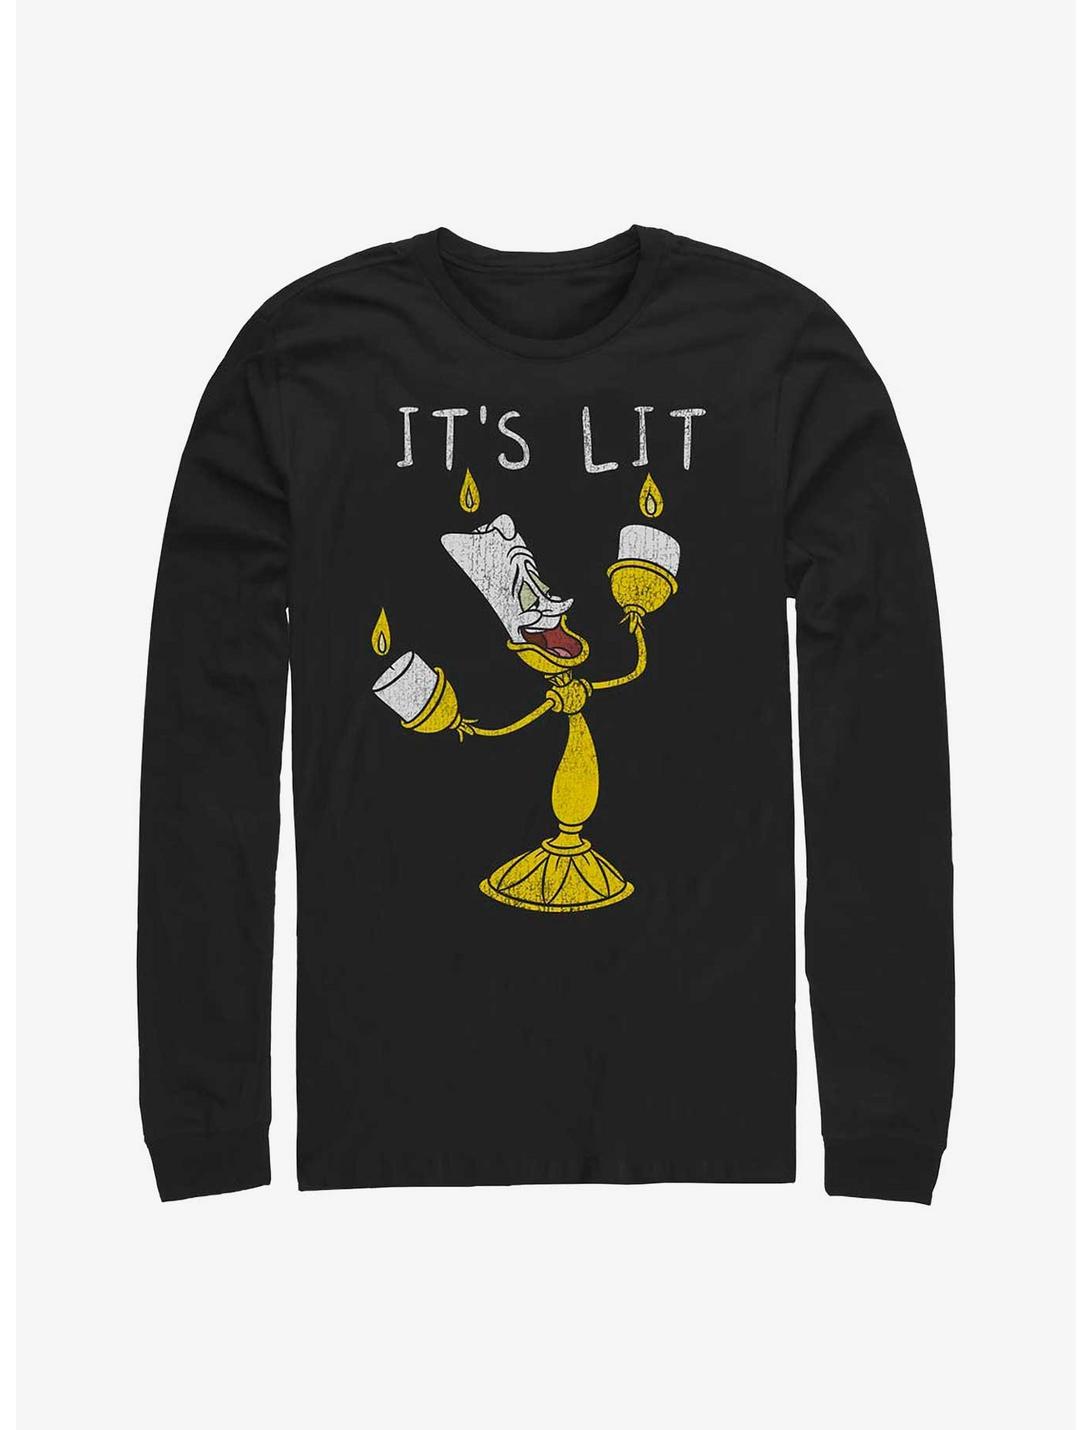 Disney Beauty And The Beast It's Lit Lumiere Long-Sleeve T-Shirt, BLACK, hi-res